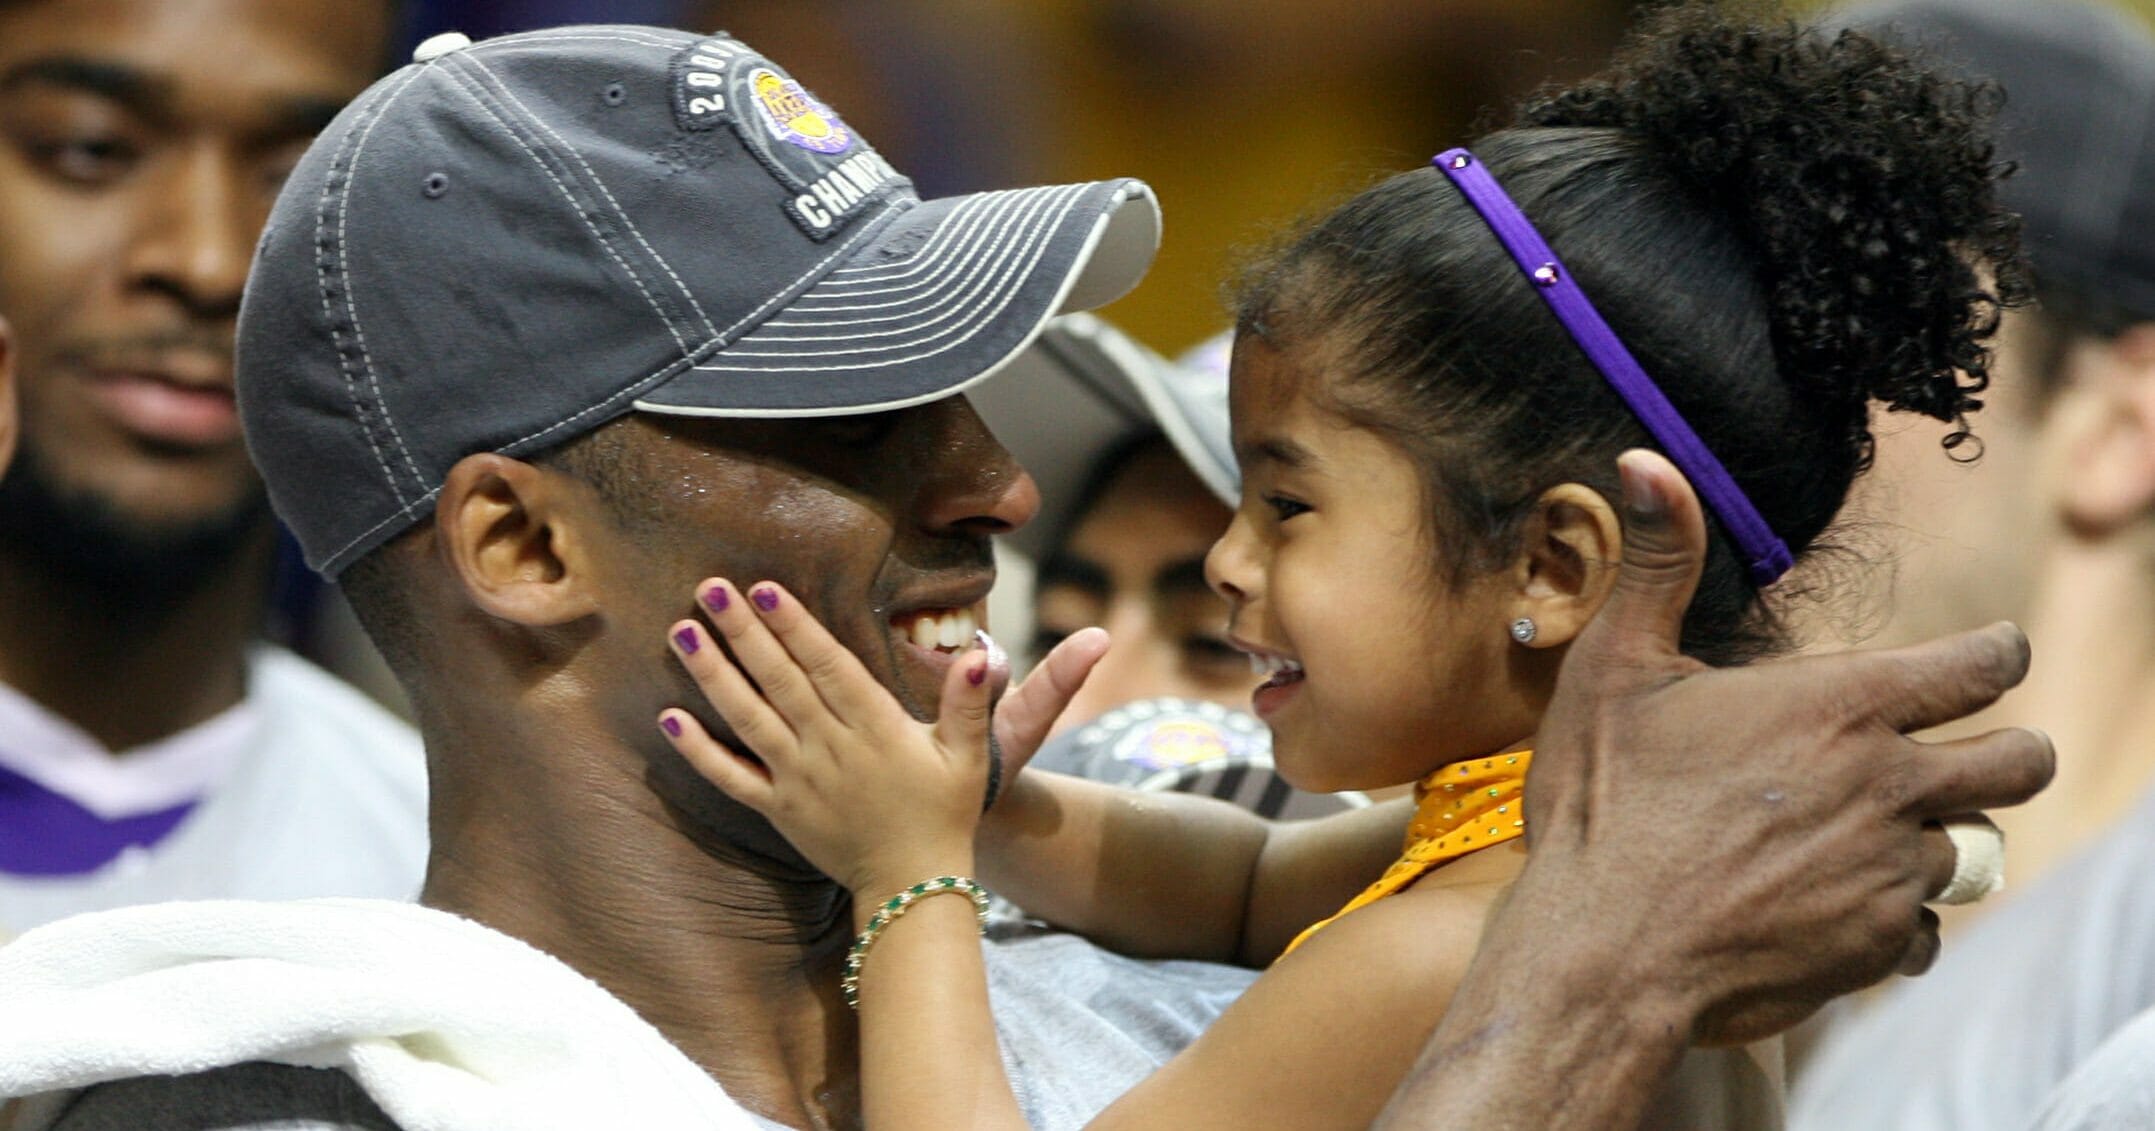 Kobe Bryant celebrates with his daughter Gianna following the Los Angeles Lakers' 99-86 defeat of the Orlando Magic in Game 5 of the NBA Finals at Amway Arena in Orlando, Florida, on June 14, 2009.